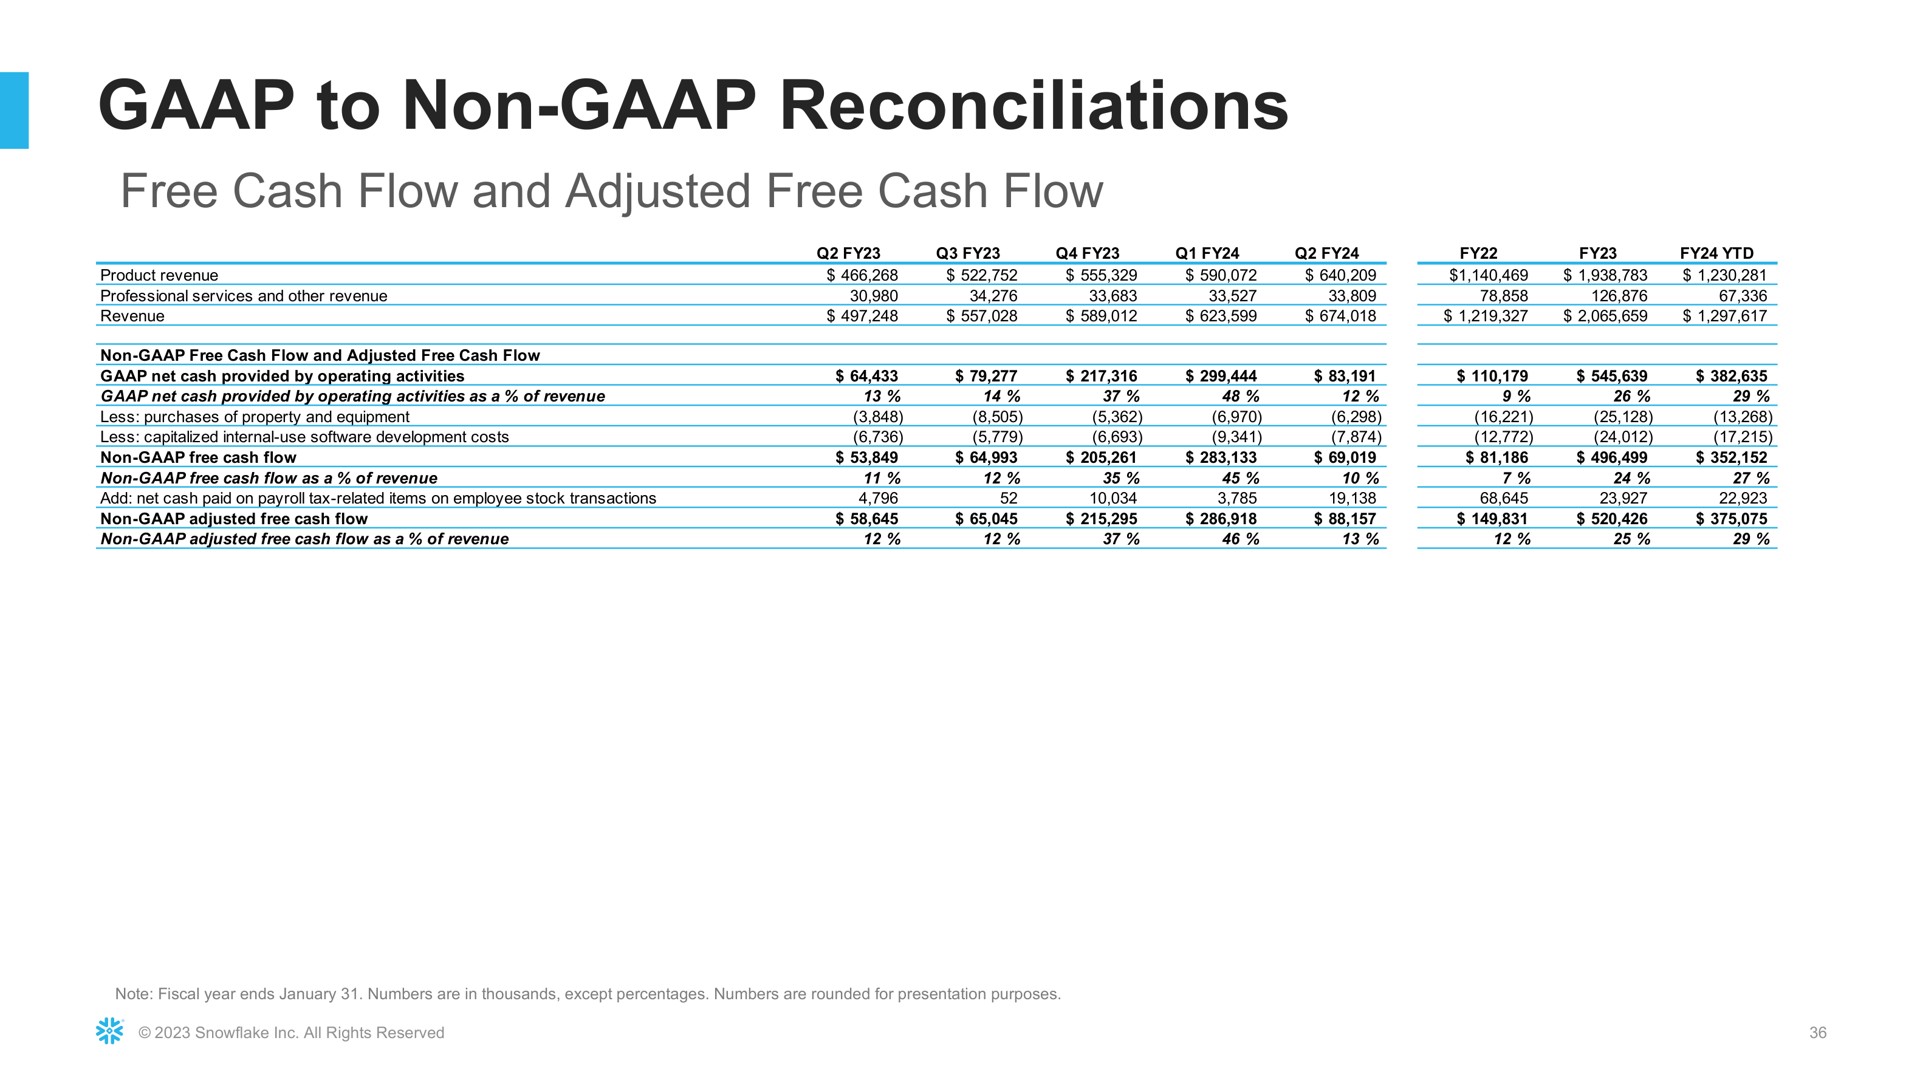 to non reconciliations free cash flow and adjusted free cash flow | Snowflake